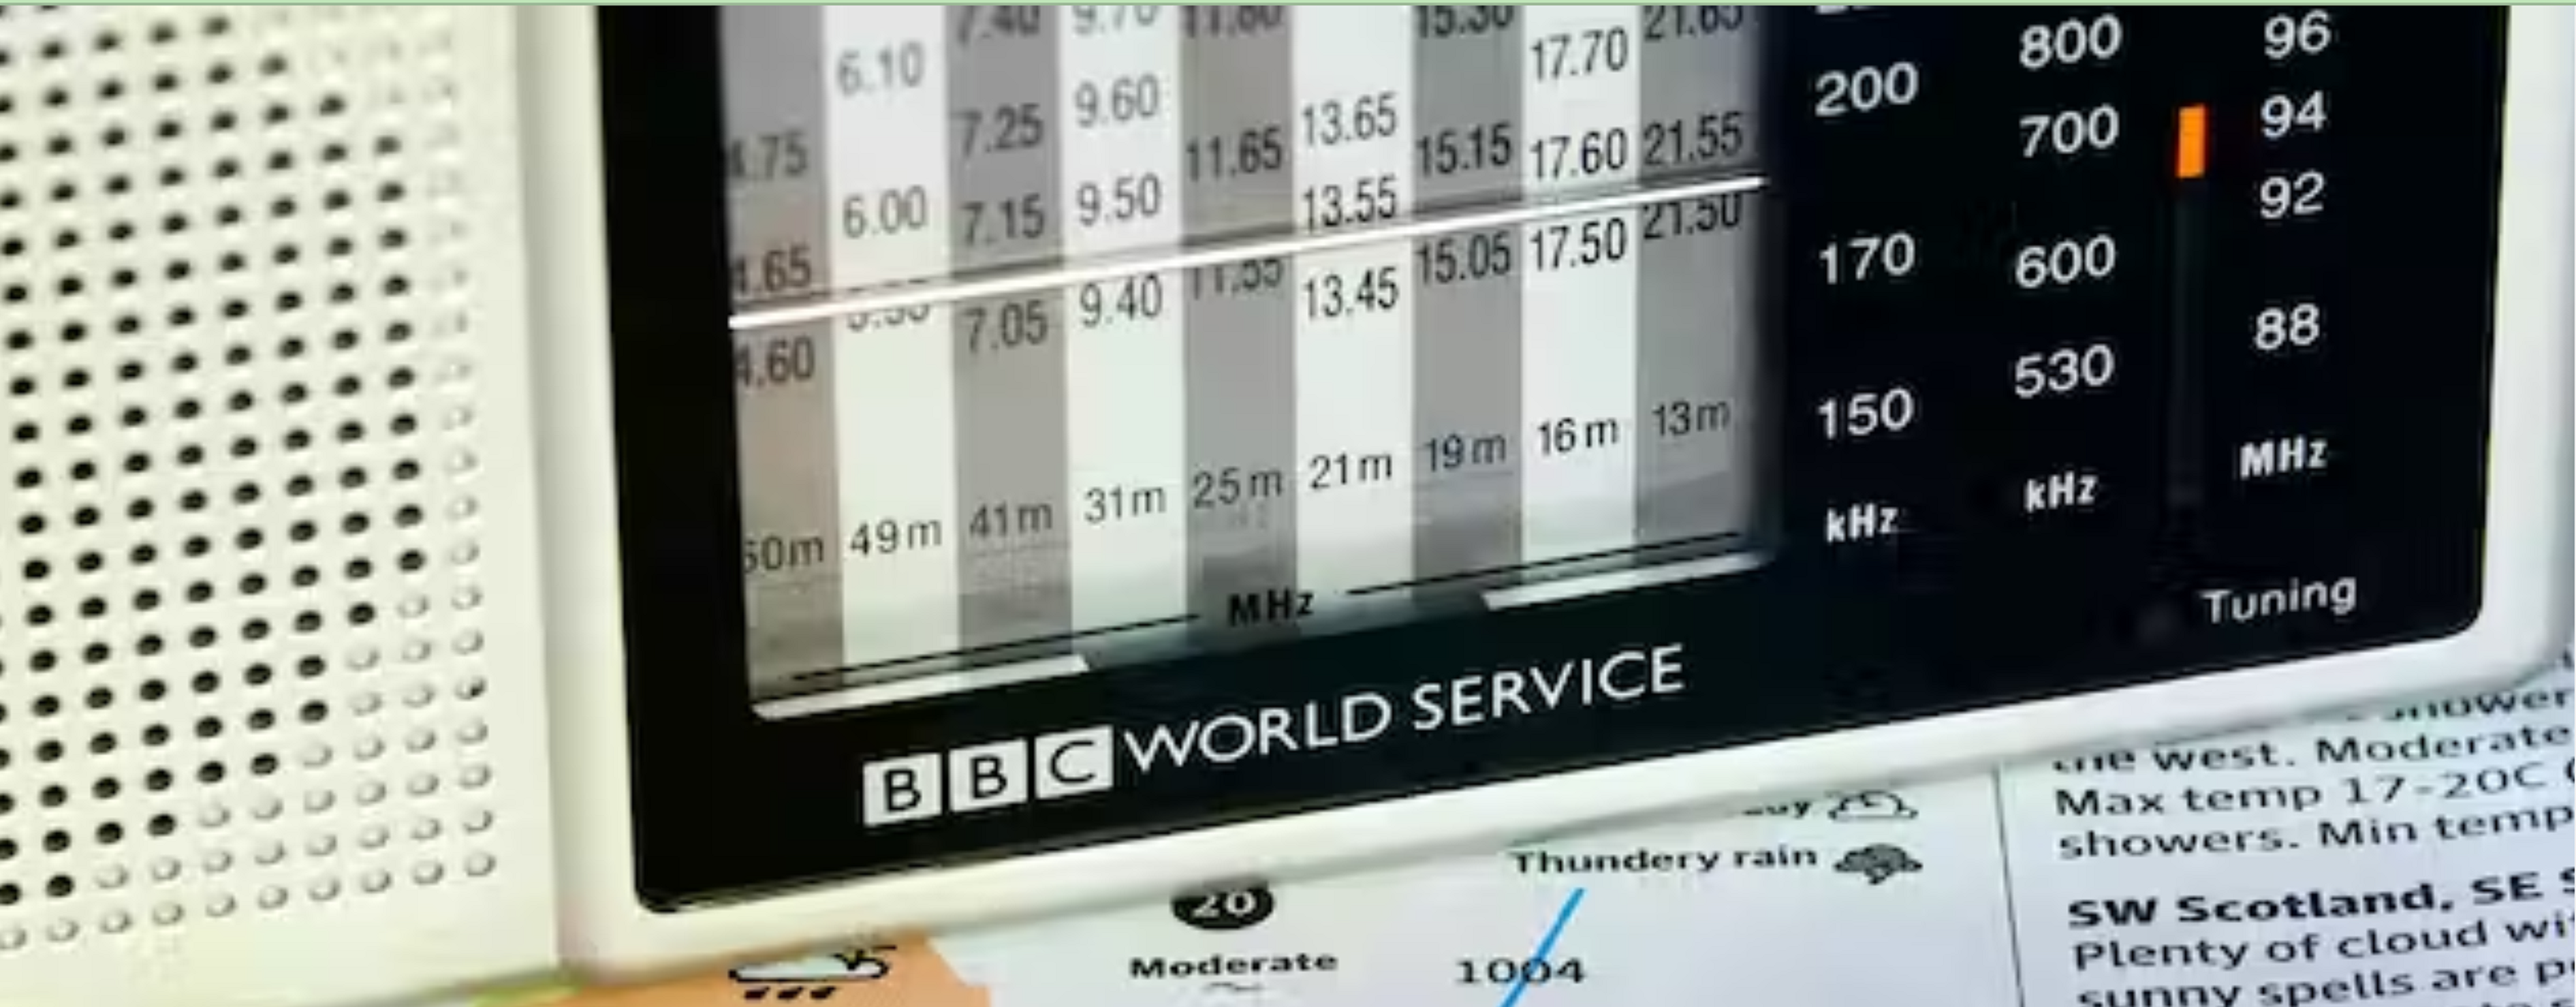 BBC at 100: a trusted international news source, but it’s important to remember whose values it reflects